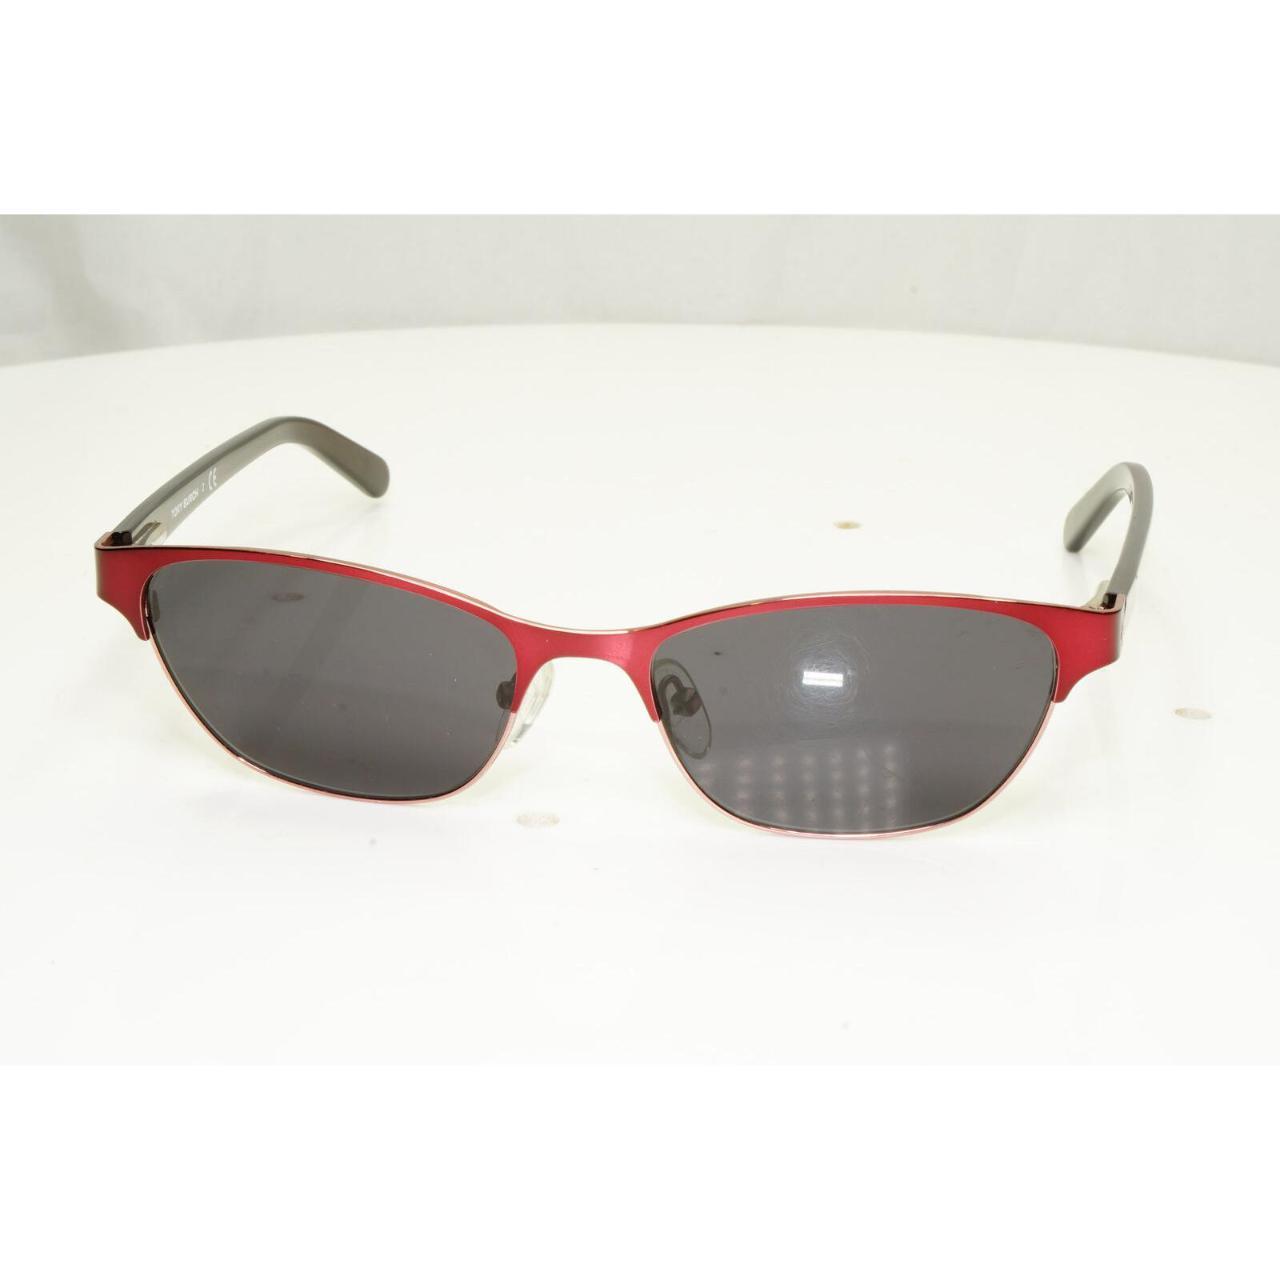 Product Image 4 - These sunglasses and all other